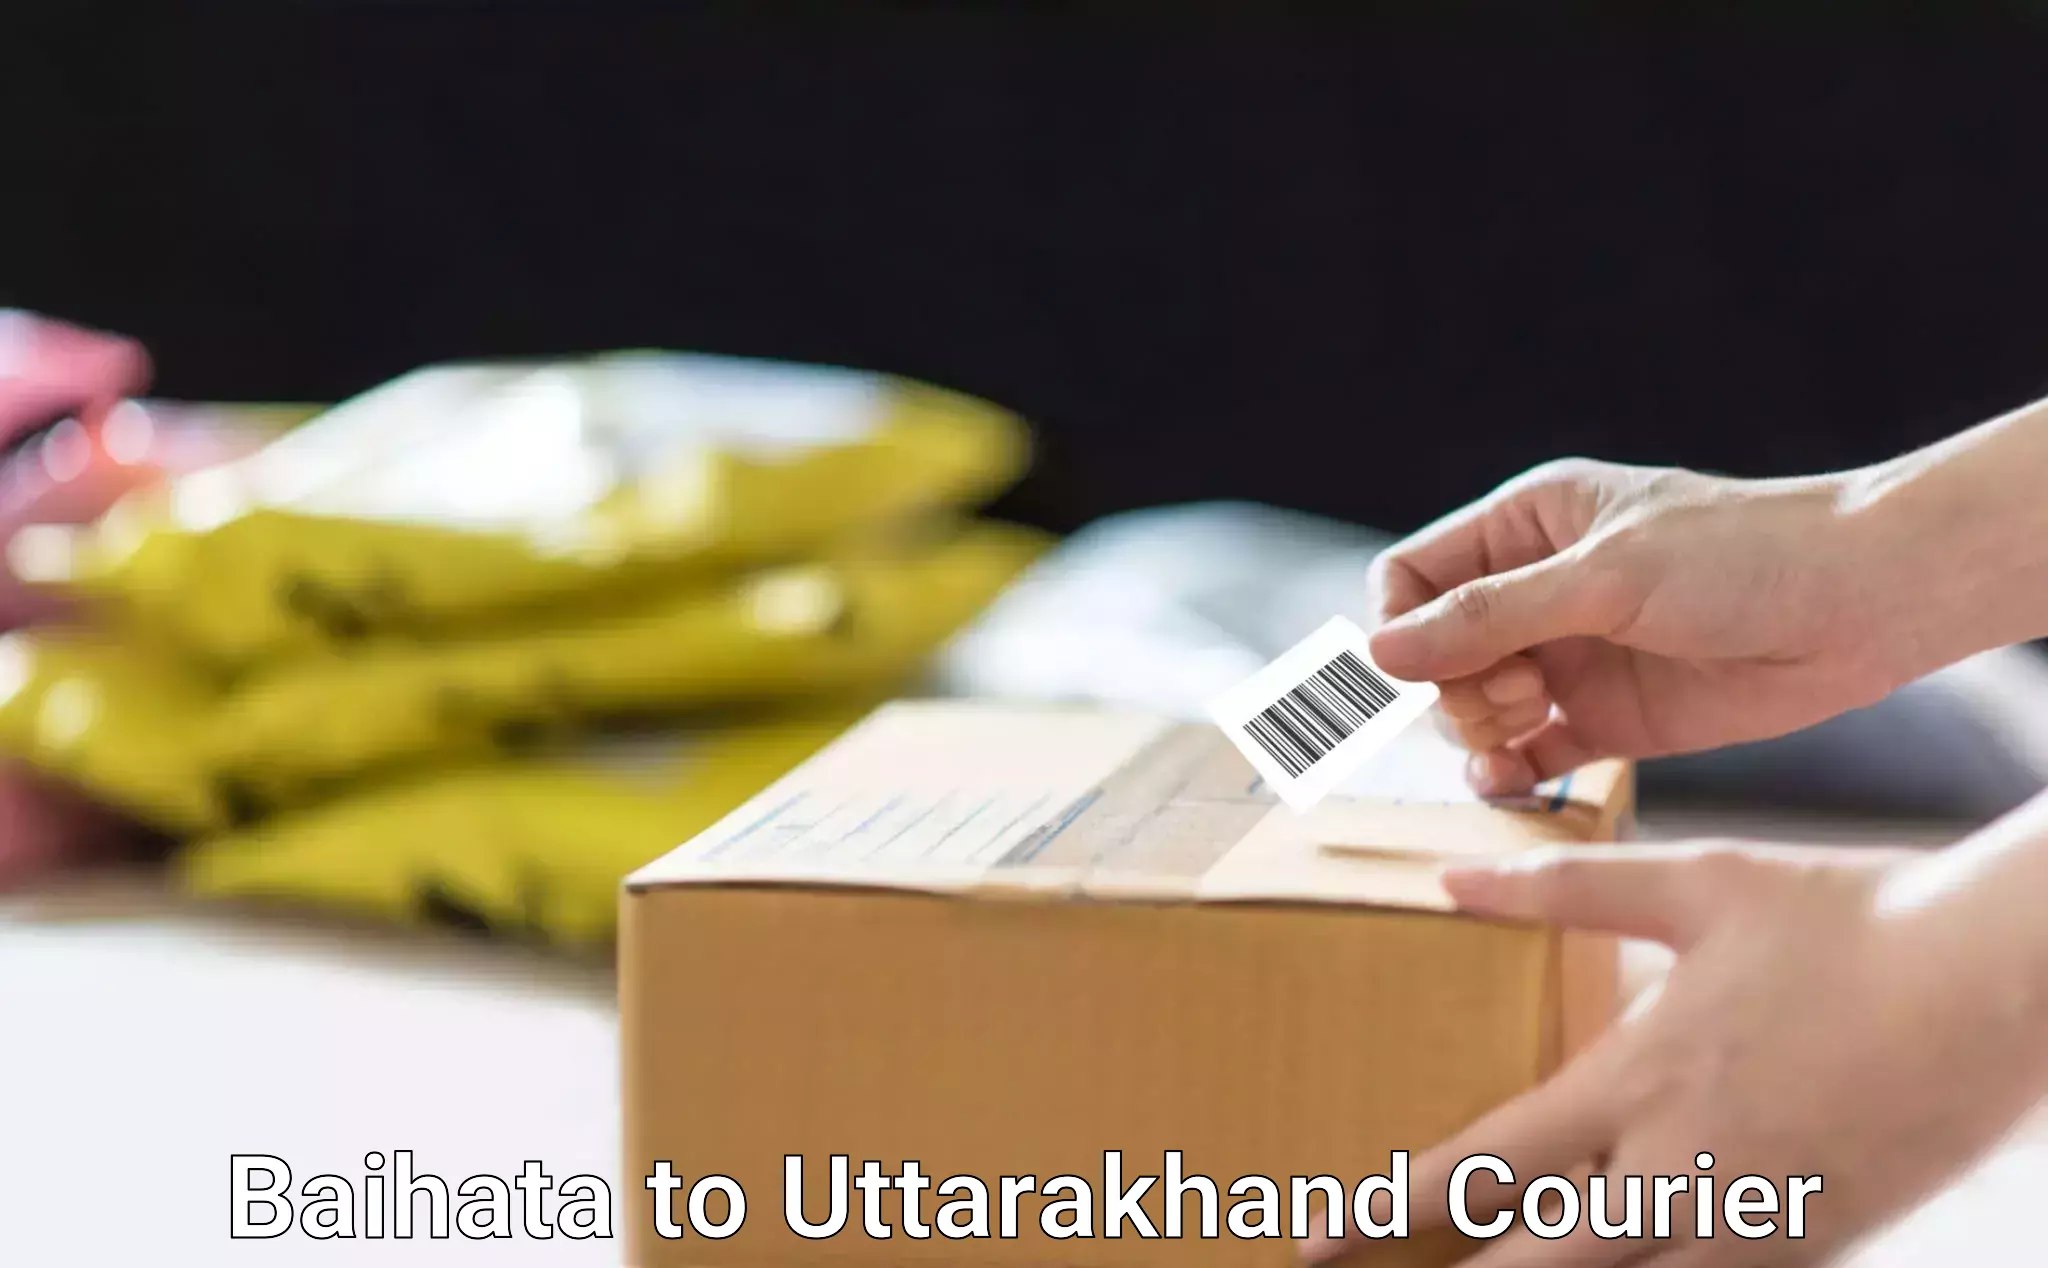 Courier service comparison in Baihata to Uttarakhand